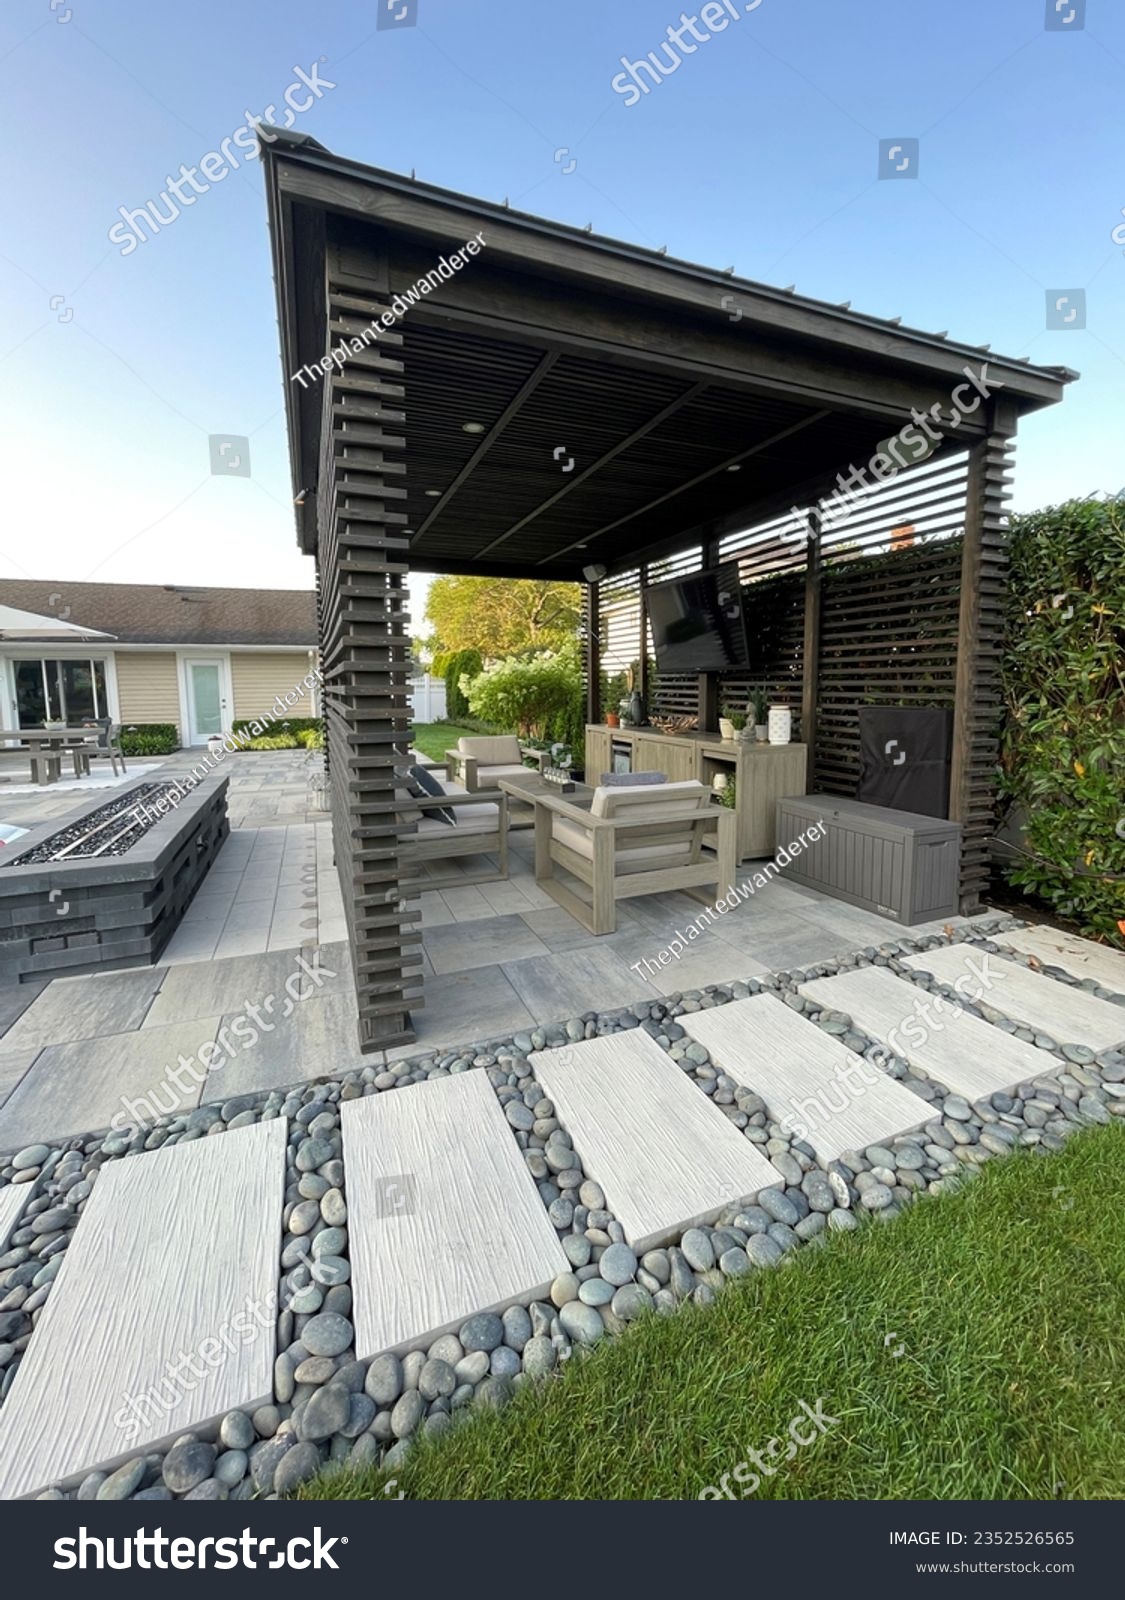 Gorgeous paving stone walkway with gray Mexican pebbles alongside pool and pavilion  pergola with pavers.  Ideal design for modern, luxury backyard living.Inspired by Tulum, Mexico's eco-chic feel. #2352526565